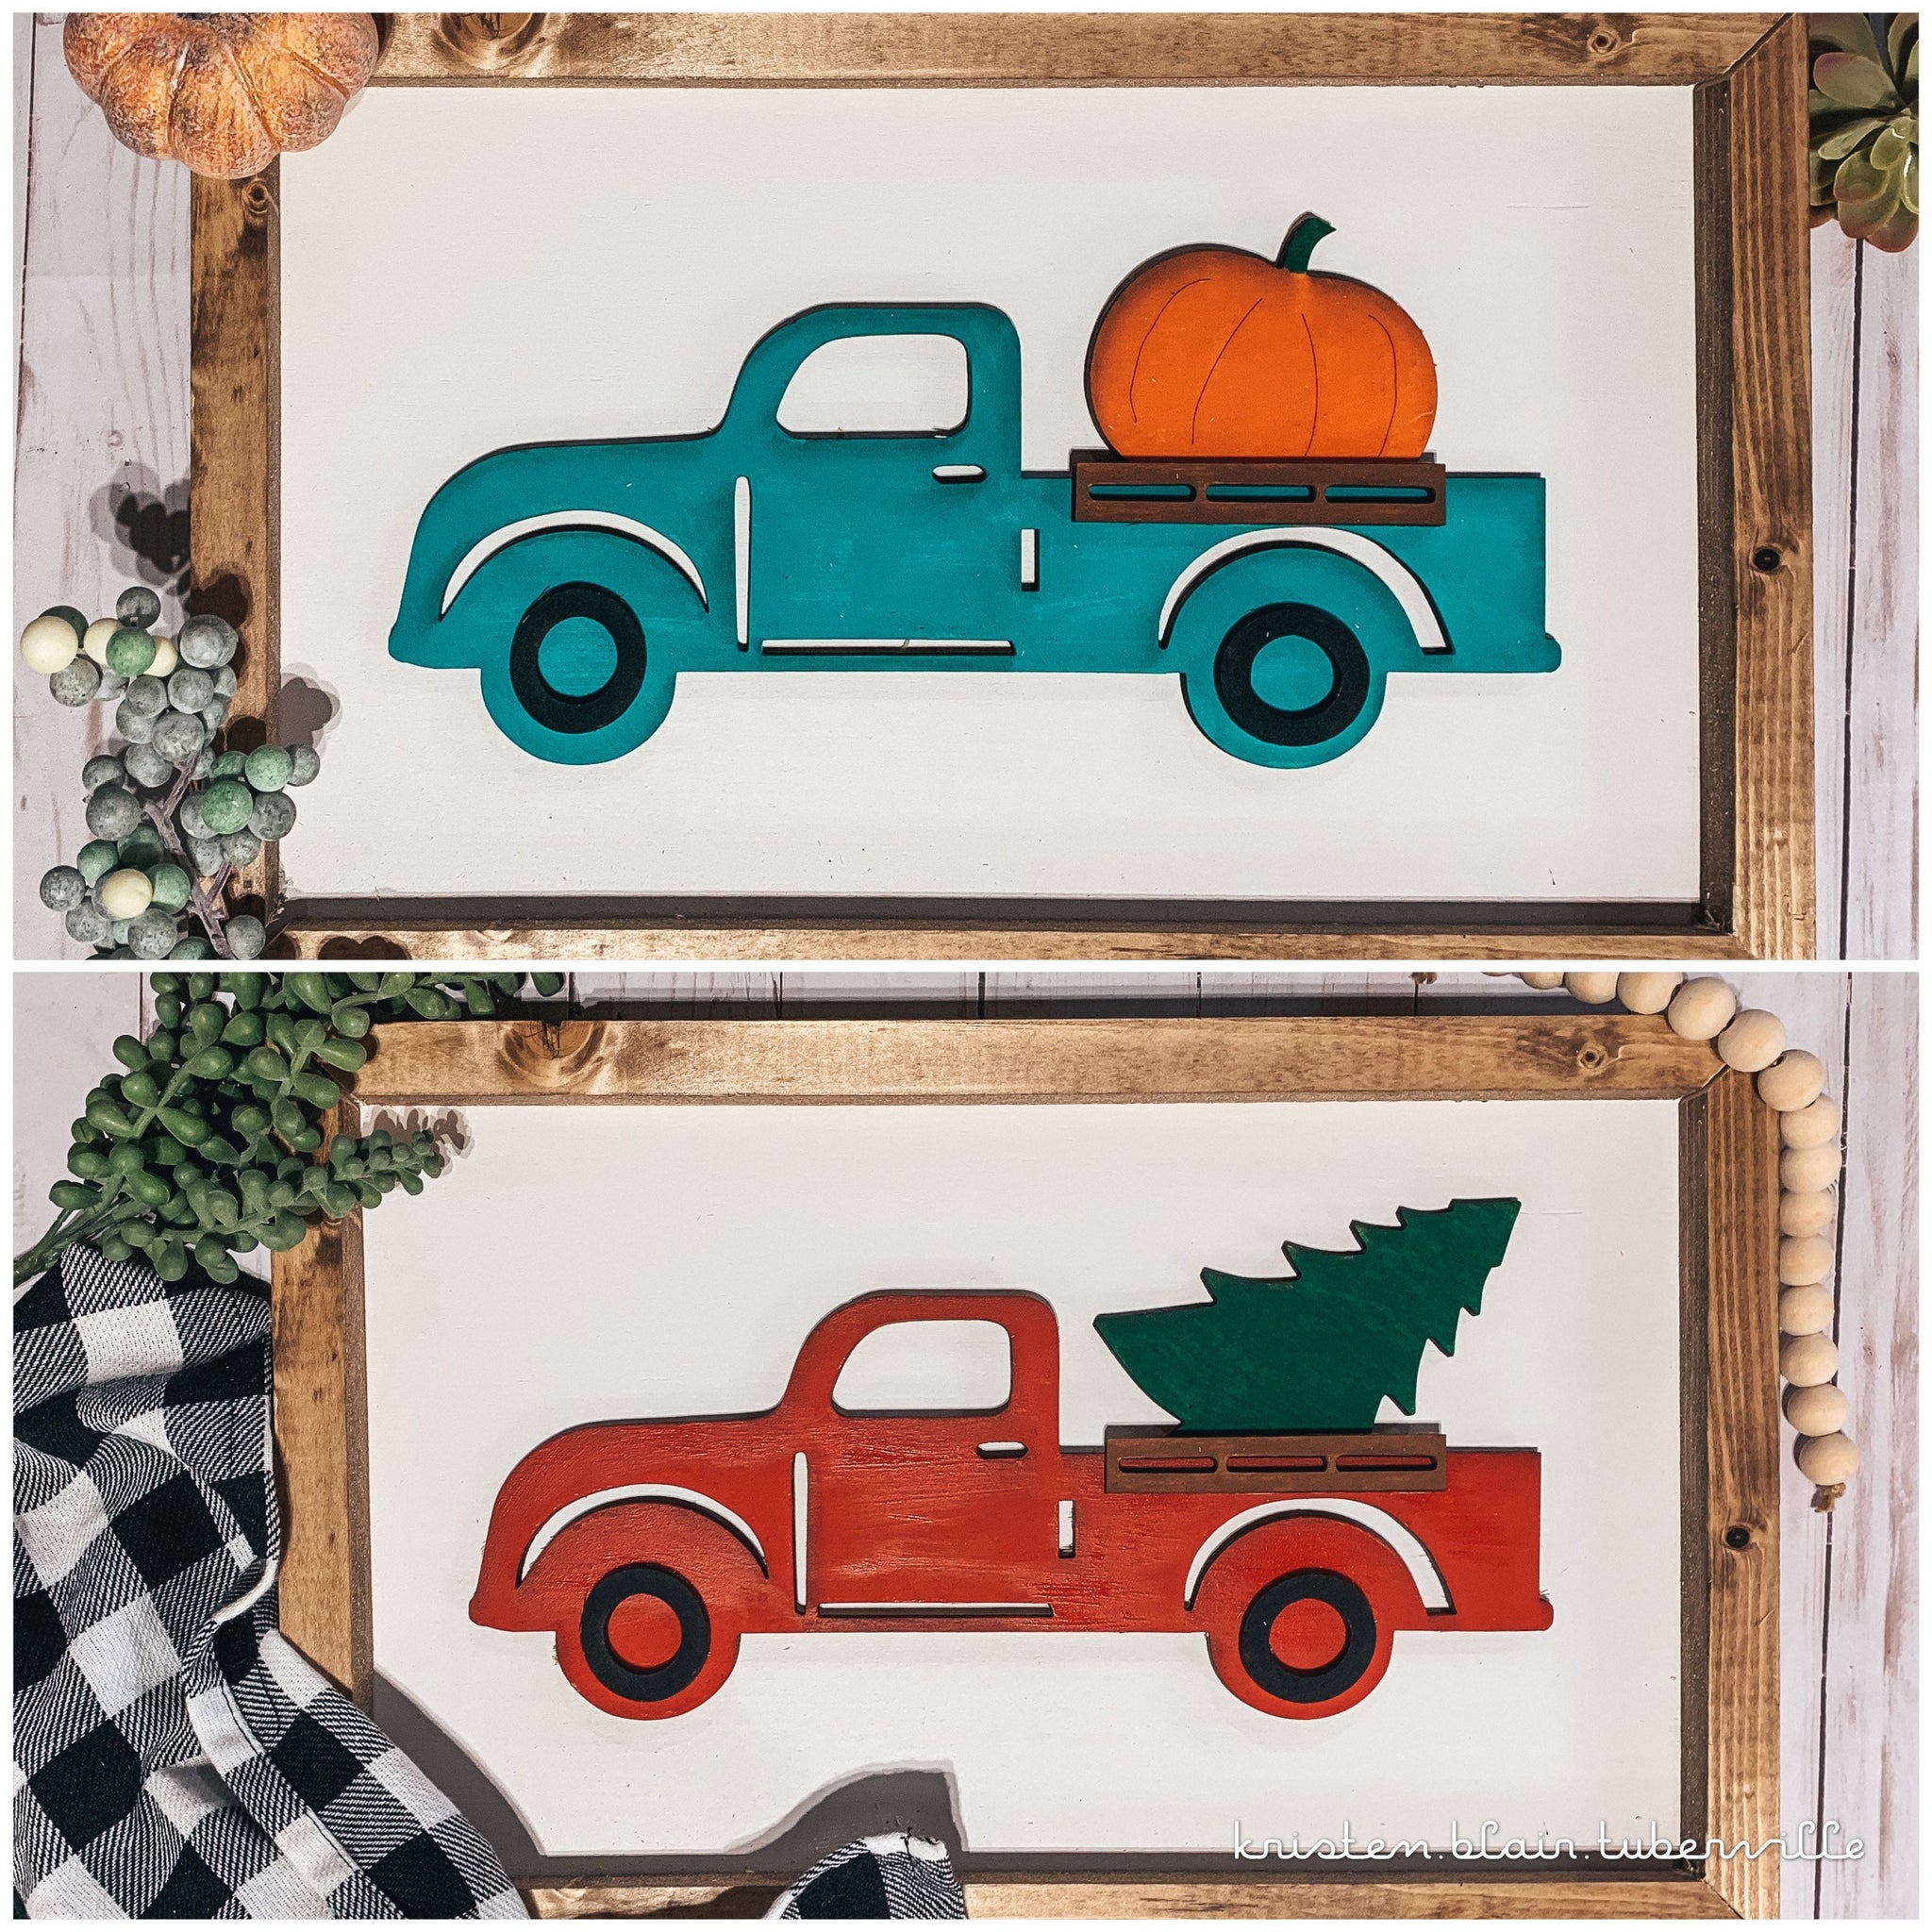 Reversible Farmhouse Truck with Pumpkins and Christmas Tree Sign - 3D